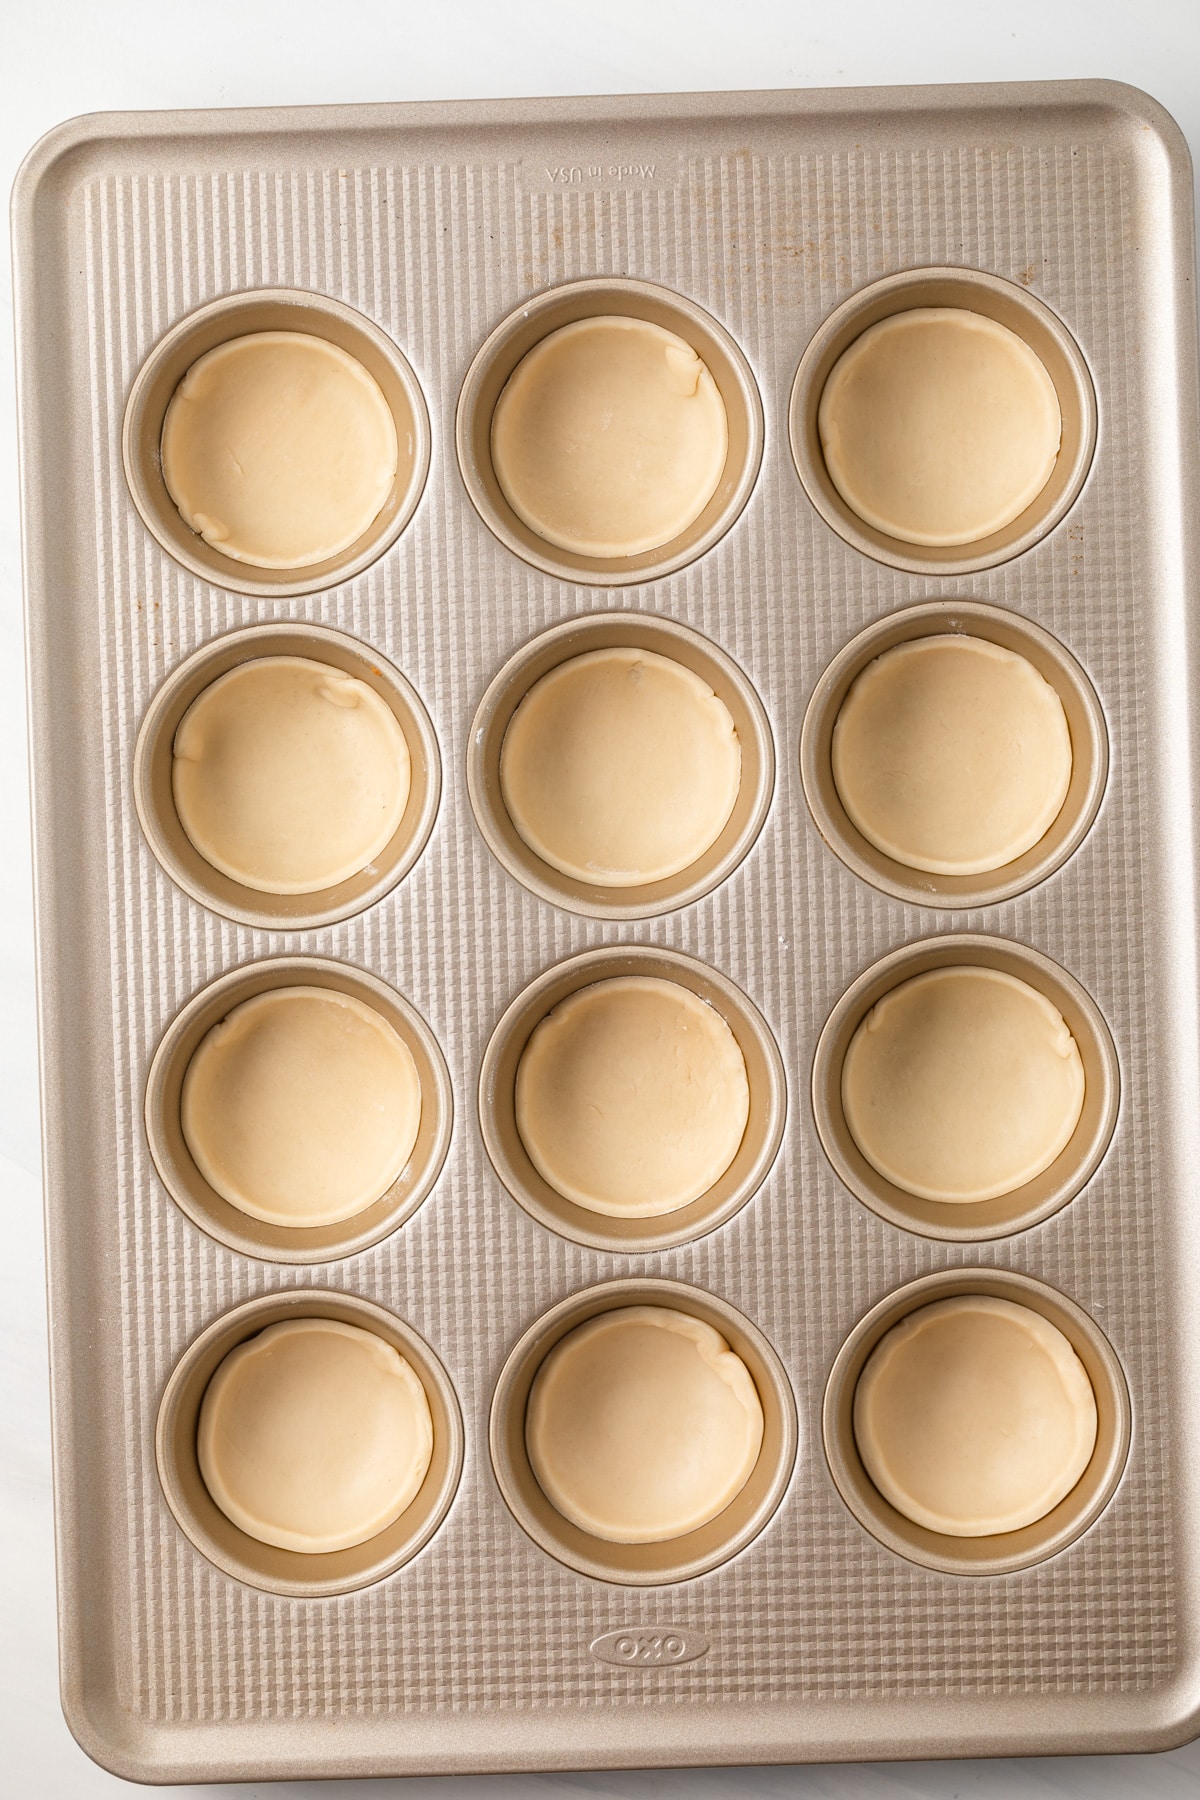 Pie dough circles pressed into muffin pan.